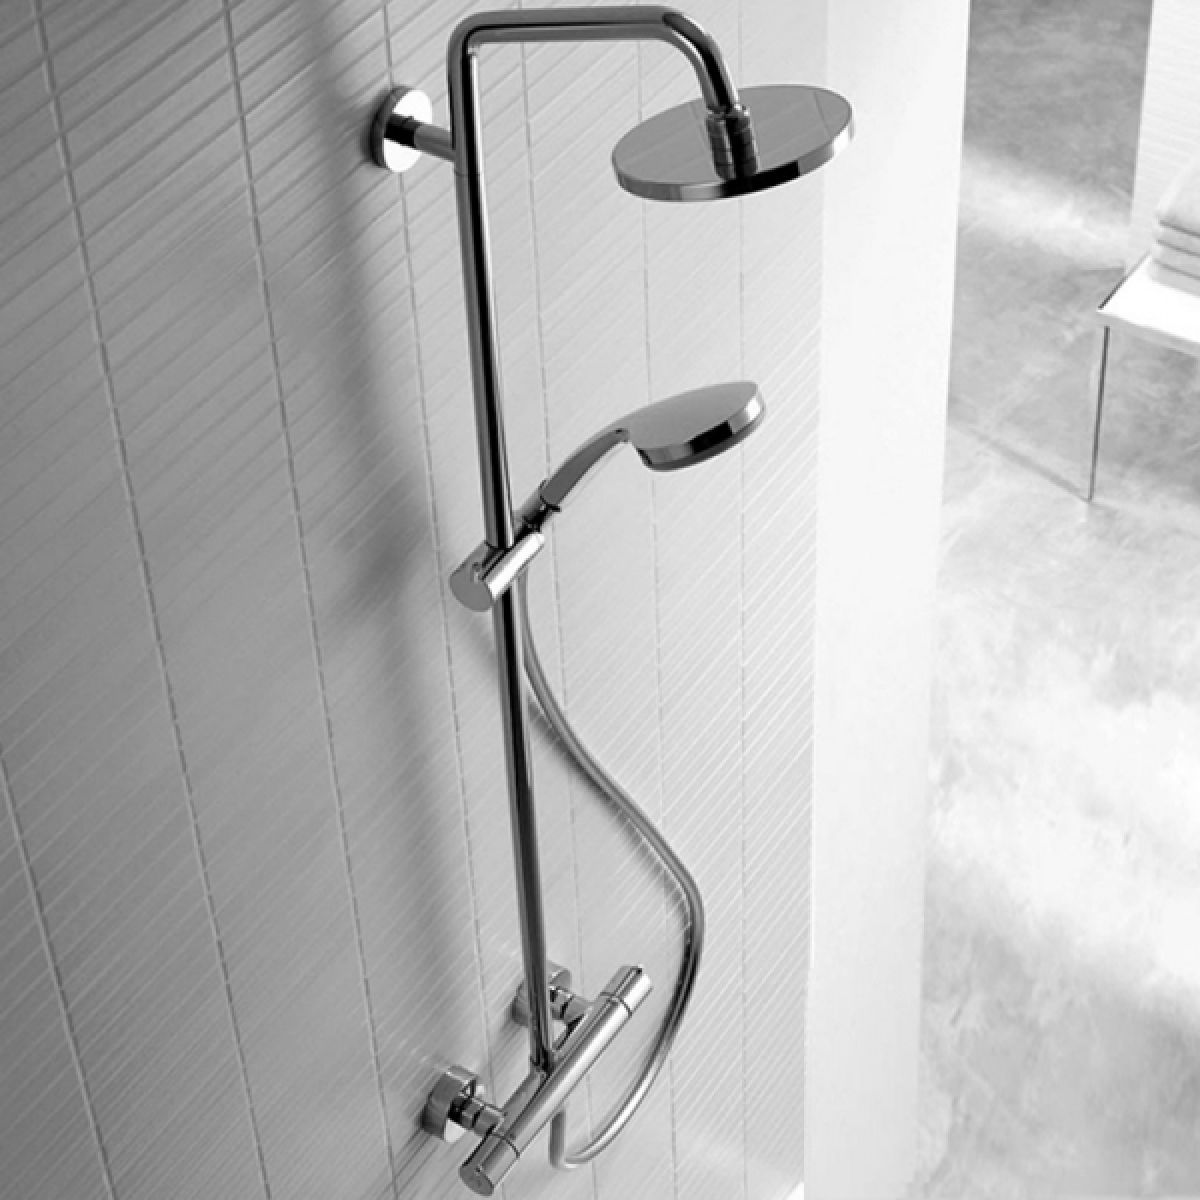 UK Bathrooms on Twitter: "This fab Croma 160 Showerpipe set is available a massive saving of £206.50 https://t.co/TmX42X39oK #bathroom #showers #bathroomsavings https://t.co/tjX3bNsNDJ" / Twitter